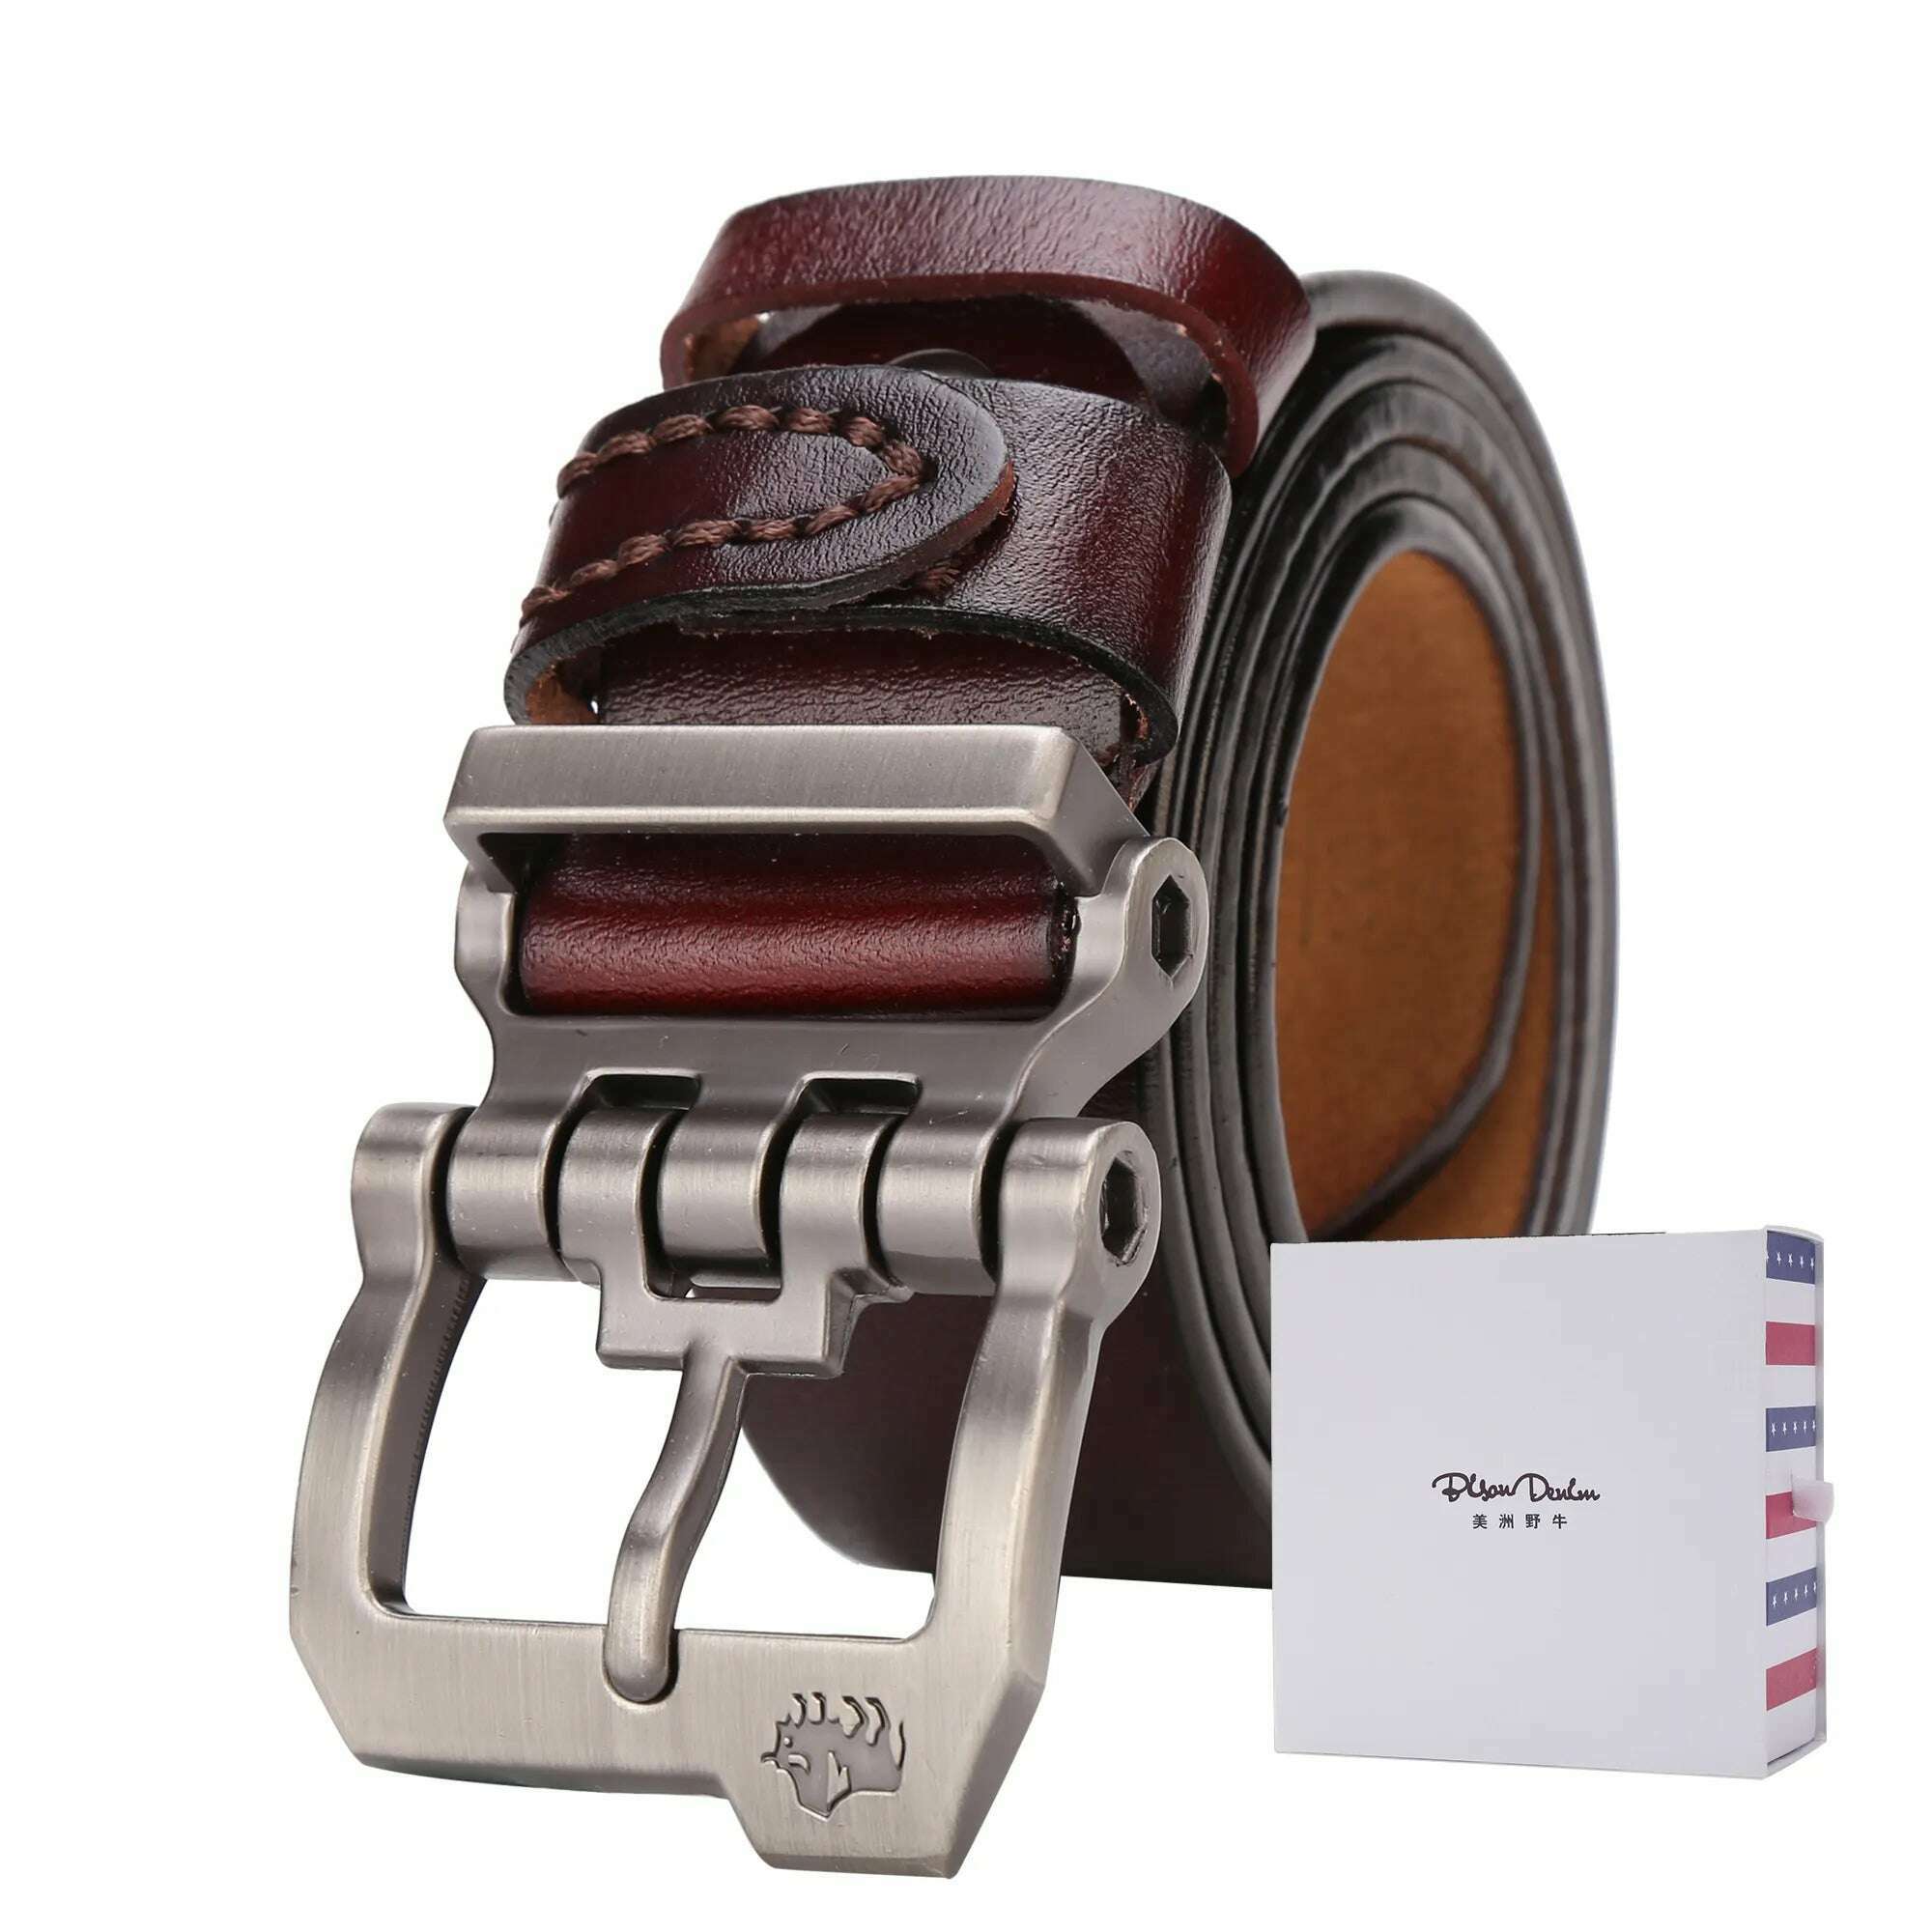 KIMLUD, BISON DENIM Genuine Leather Men Belt Cowskin High Quality Personality Buckle Vintage Business Male Waist Straps For Jeans, KIMLUD Women's Clothes